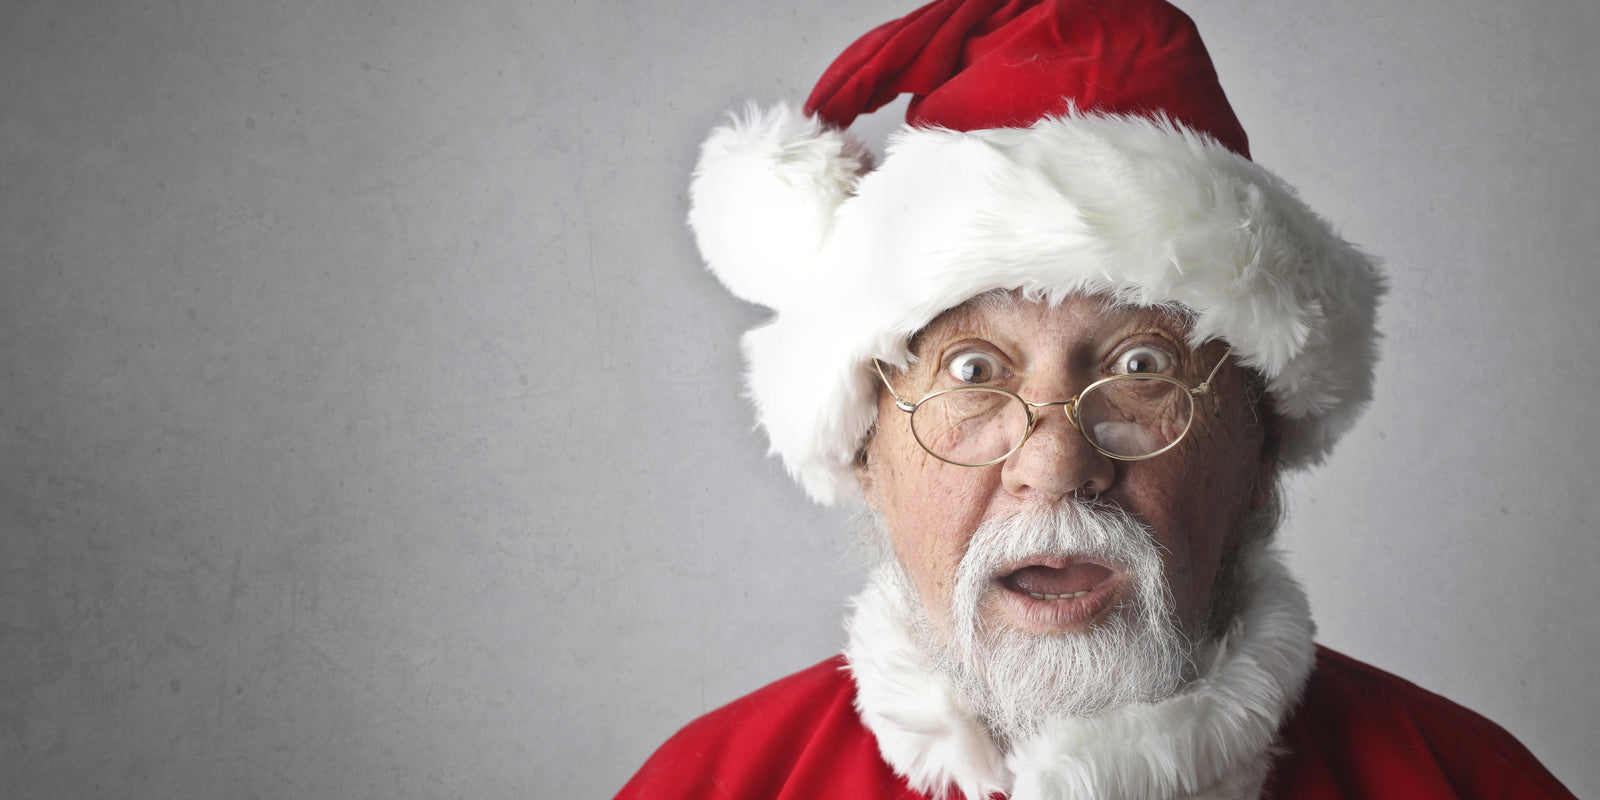 Where Did the Real Santa Claus Live? It’s Nowhere Near the North Pole!